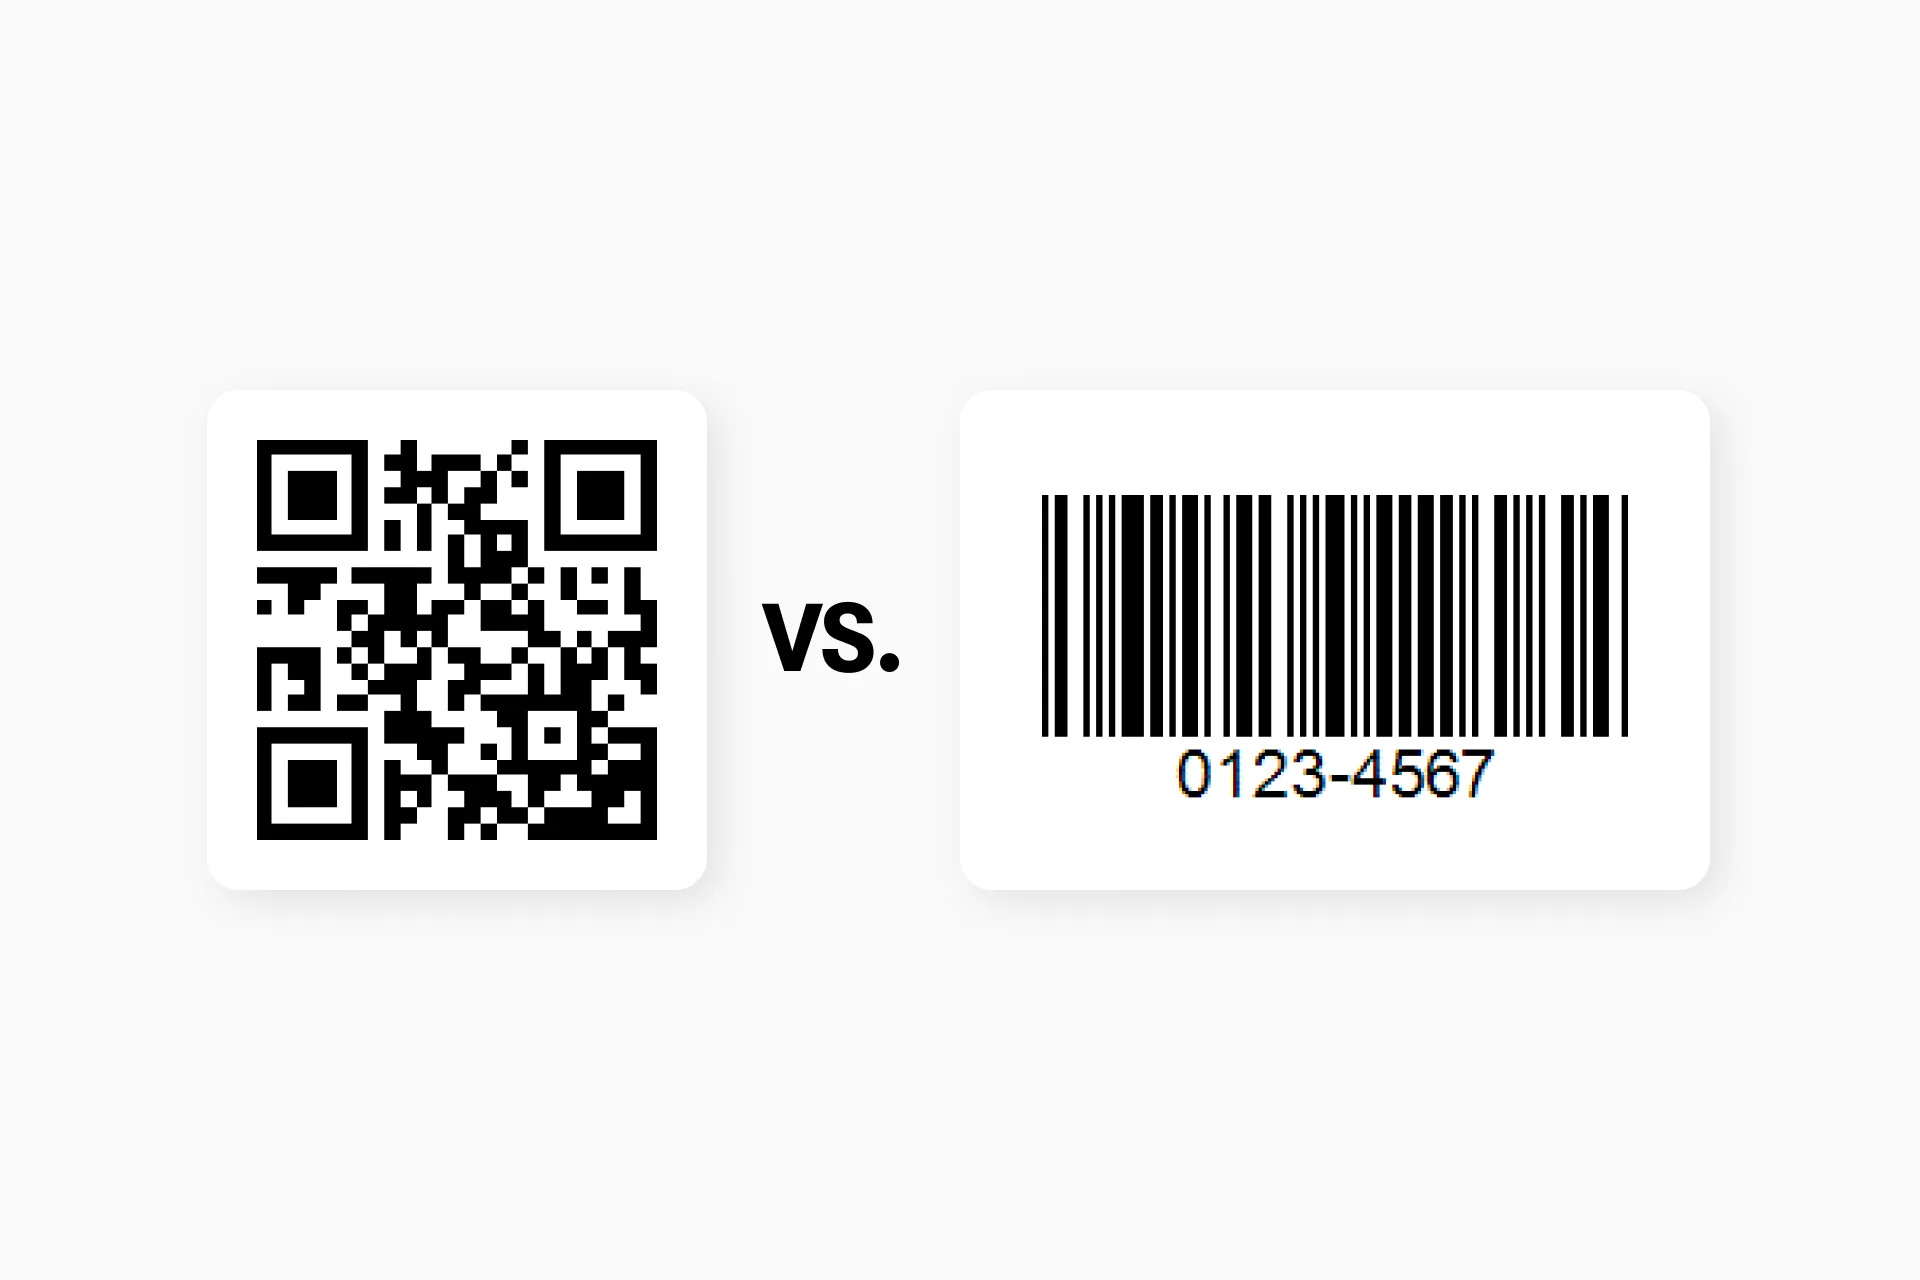 QR codes vs barcodes: Which should you use for equipment?